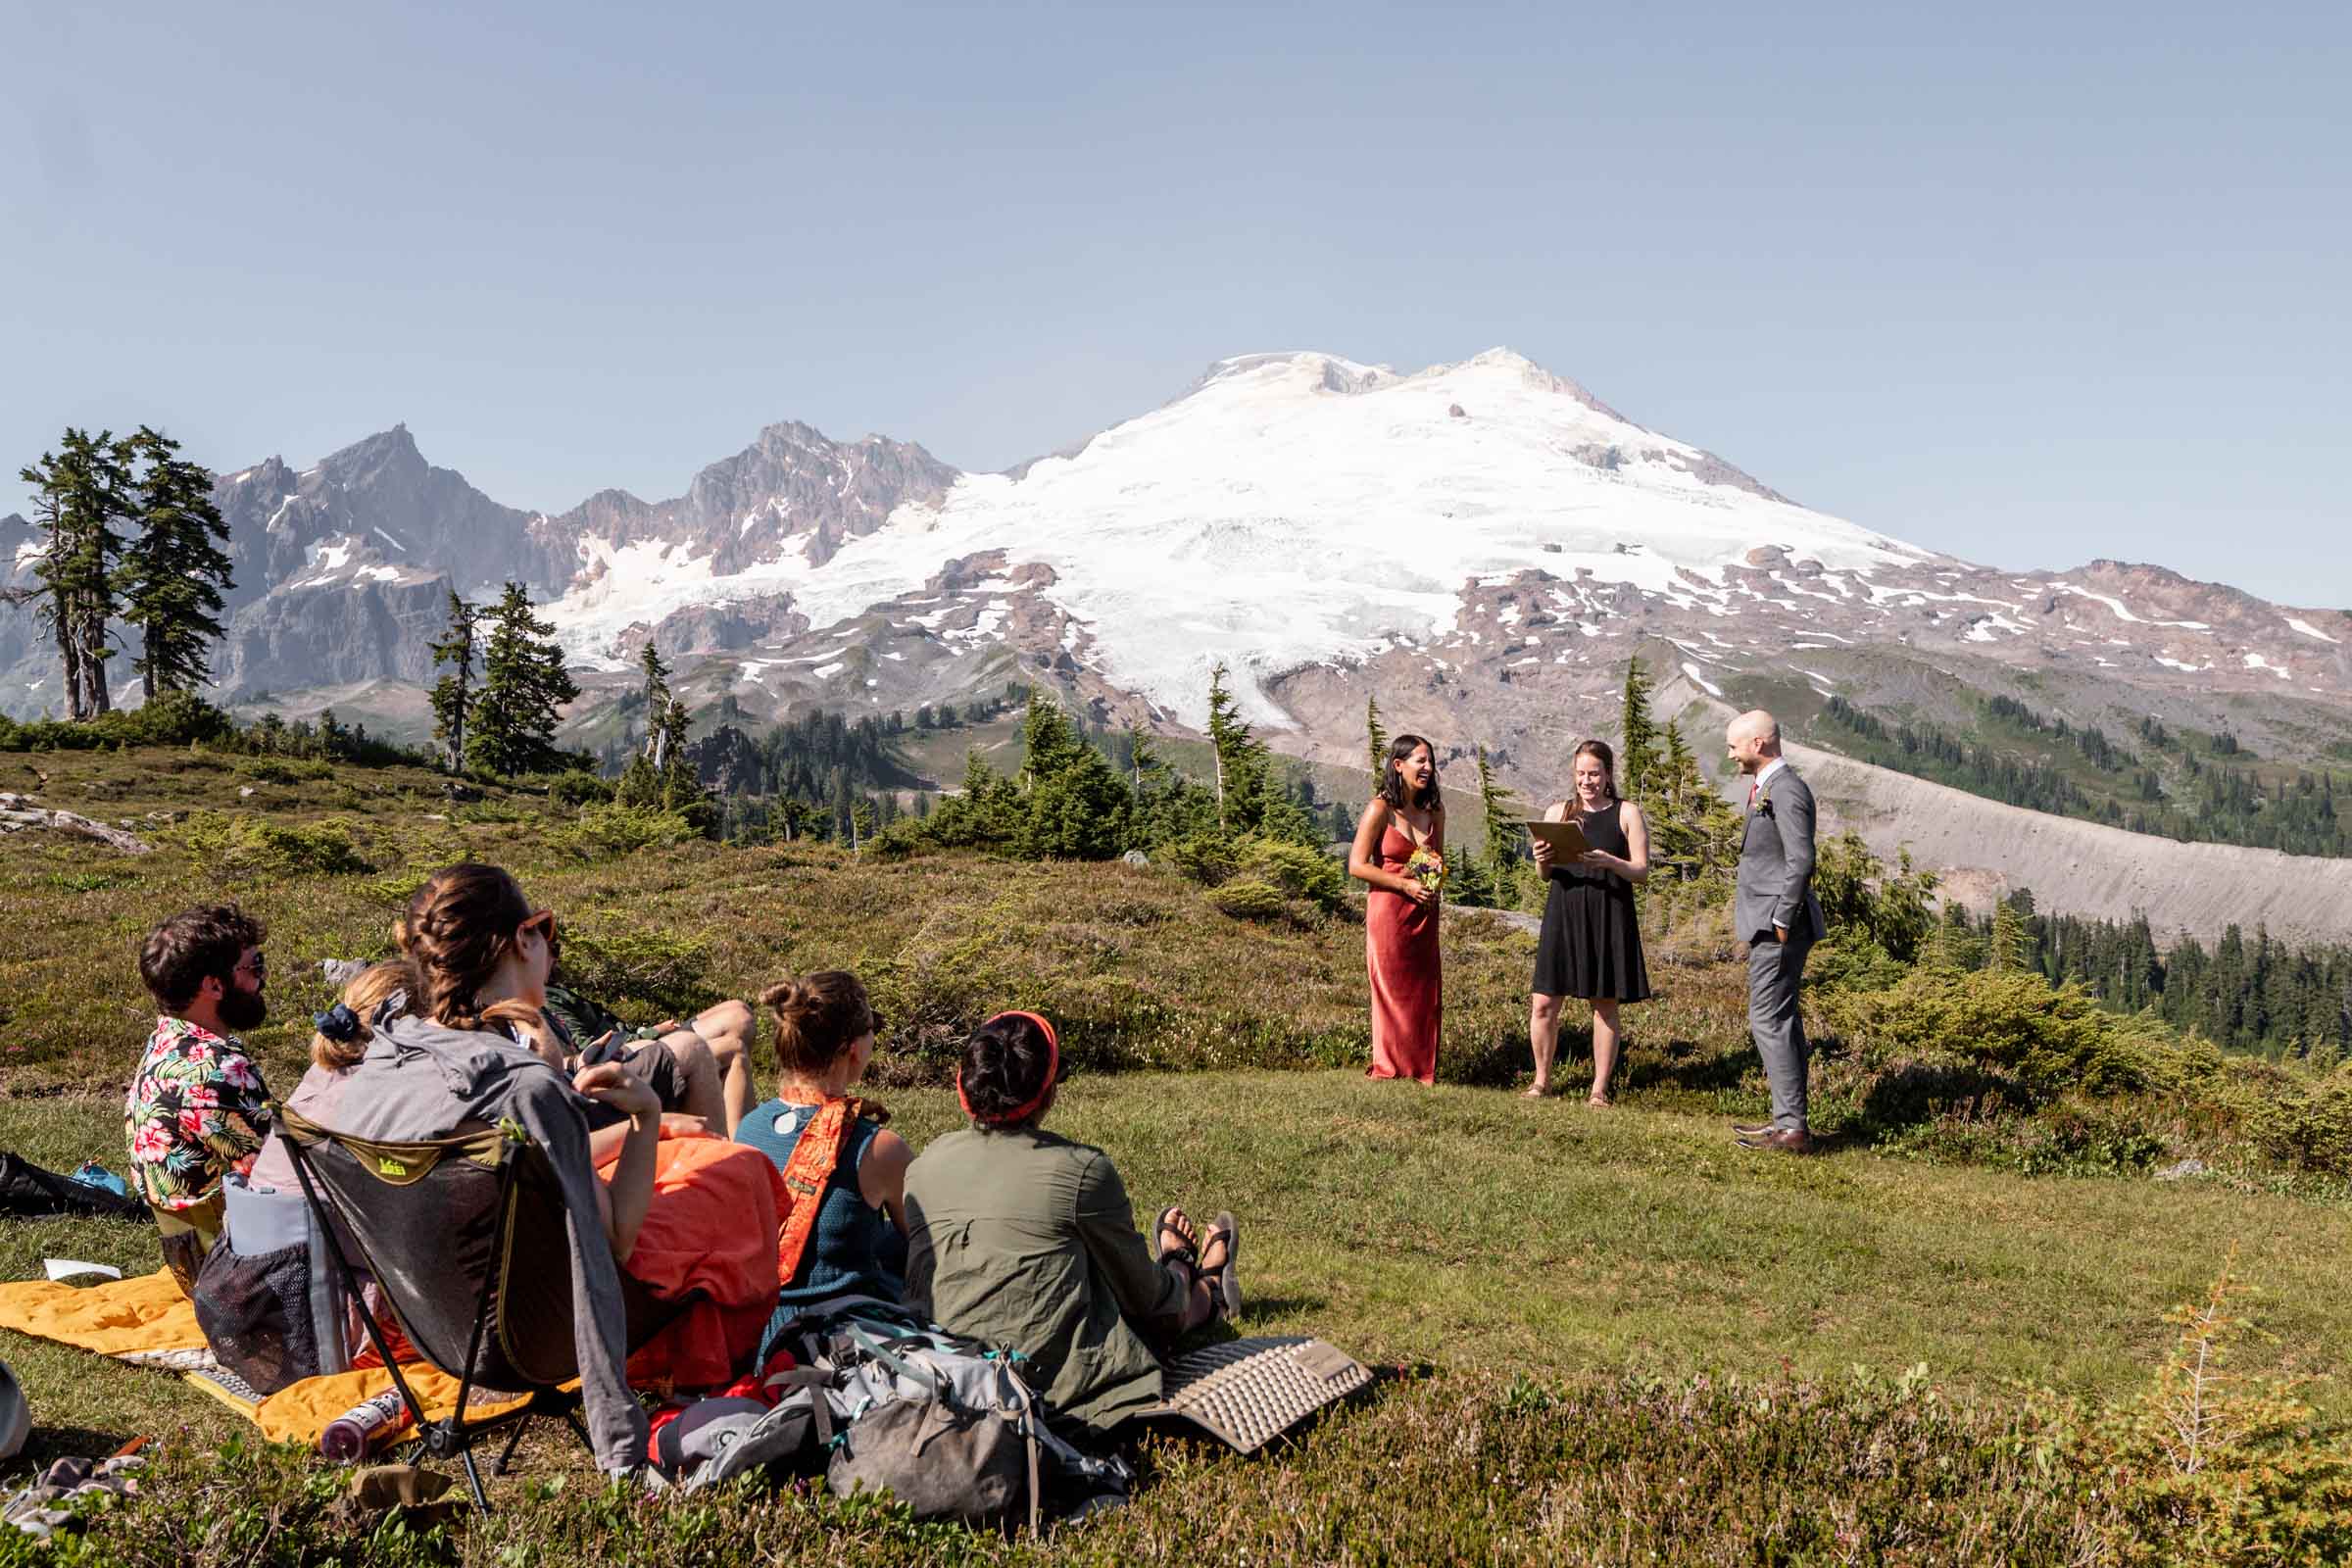 Laughter Fills the Air | Mt Baker Backpacking Elopement